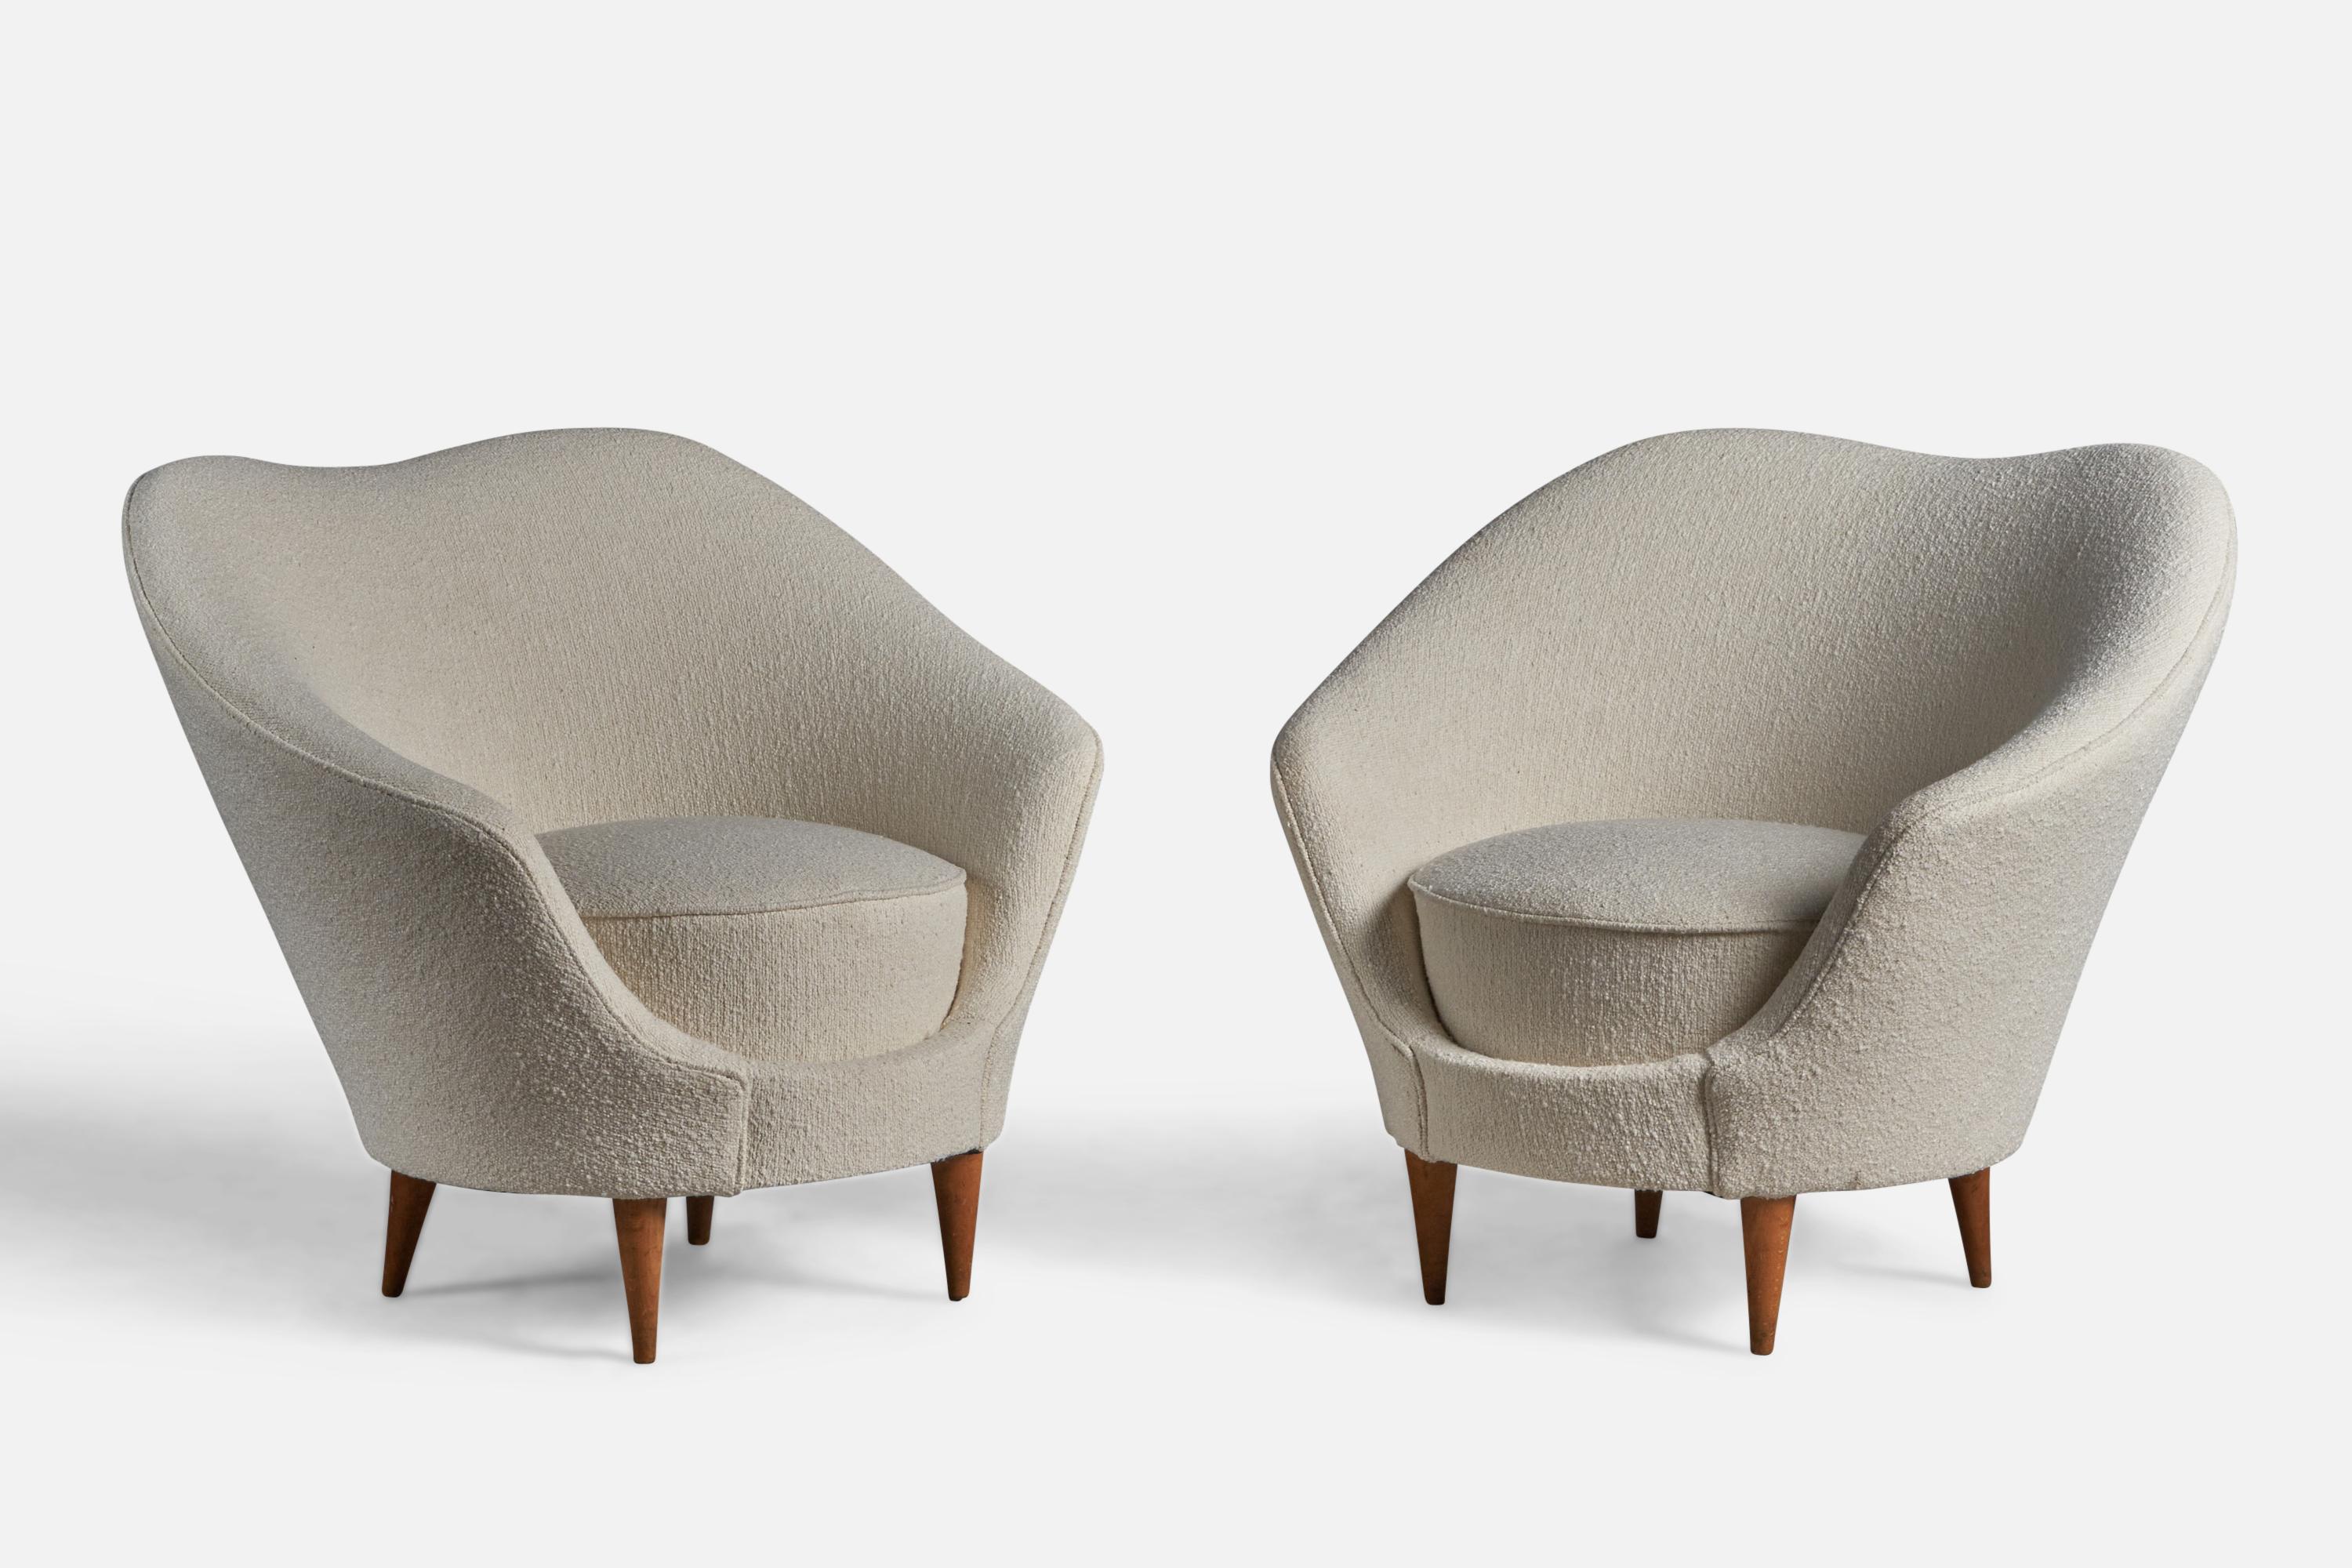 A pair of walnut and white bouclé fabric lounge chairs designed by Federico Munari and produced by ISA Bergamo, Italy, 1950s.

15.5” seat height